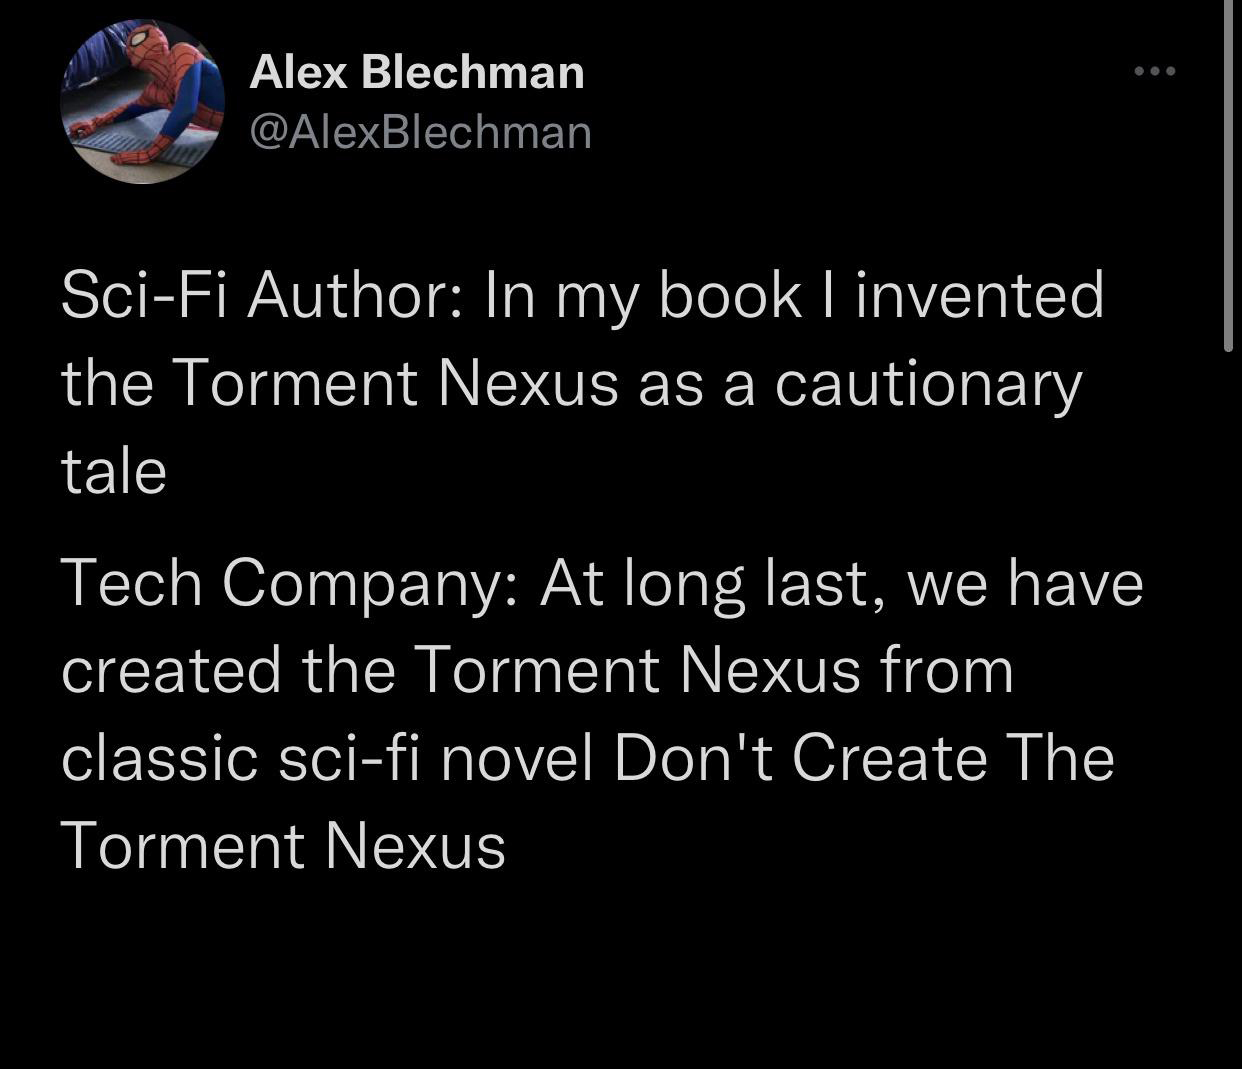 funny tweets - Author In my book I invented the Torment Nexus as a cautionary tale Tech Company At long last, we have created the Torment Nexus from classic scifi novel Don't Create The Torment Nexus